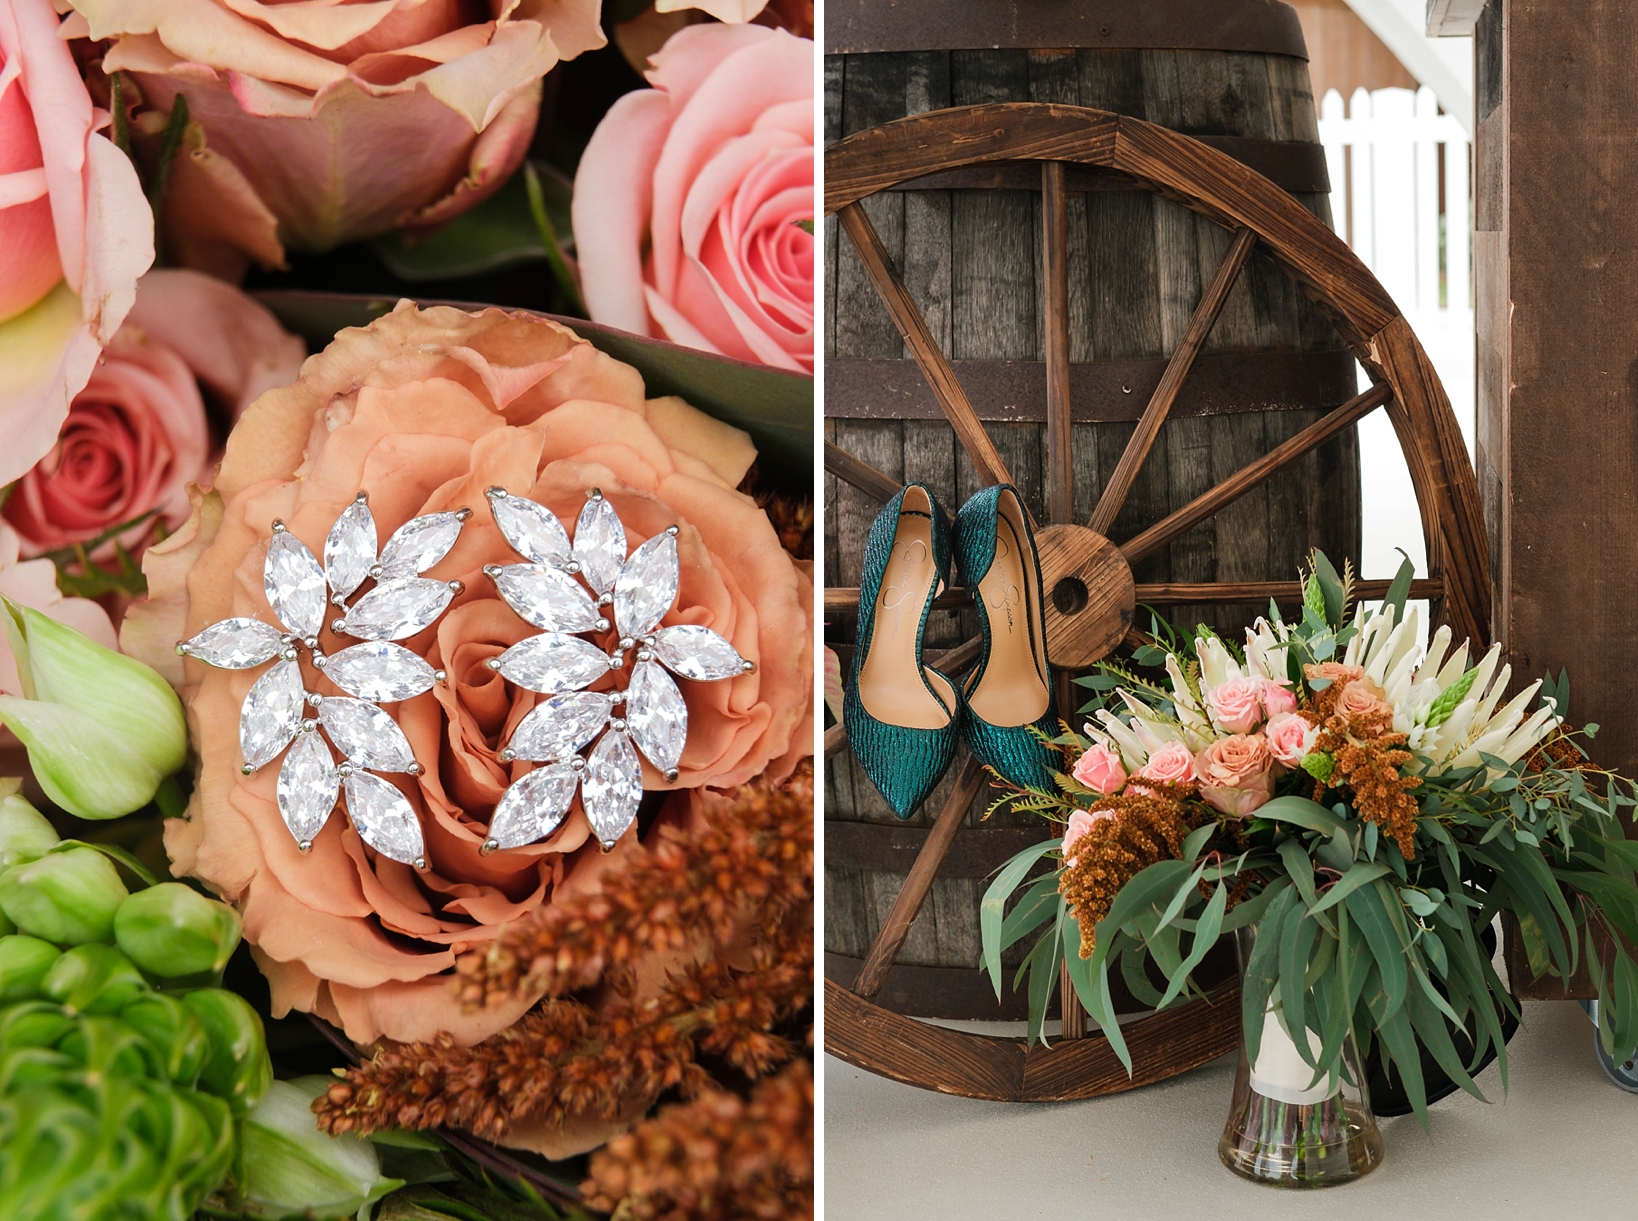 Bridal details including diamond earrings and her full floral bouquet